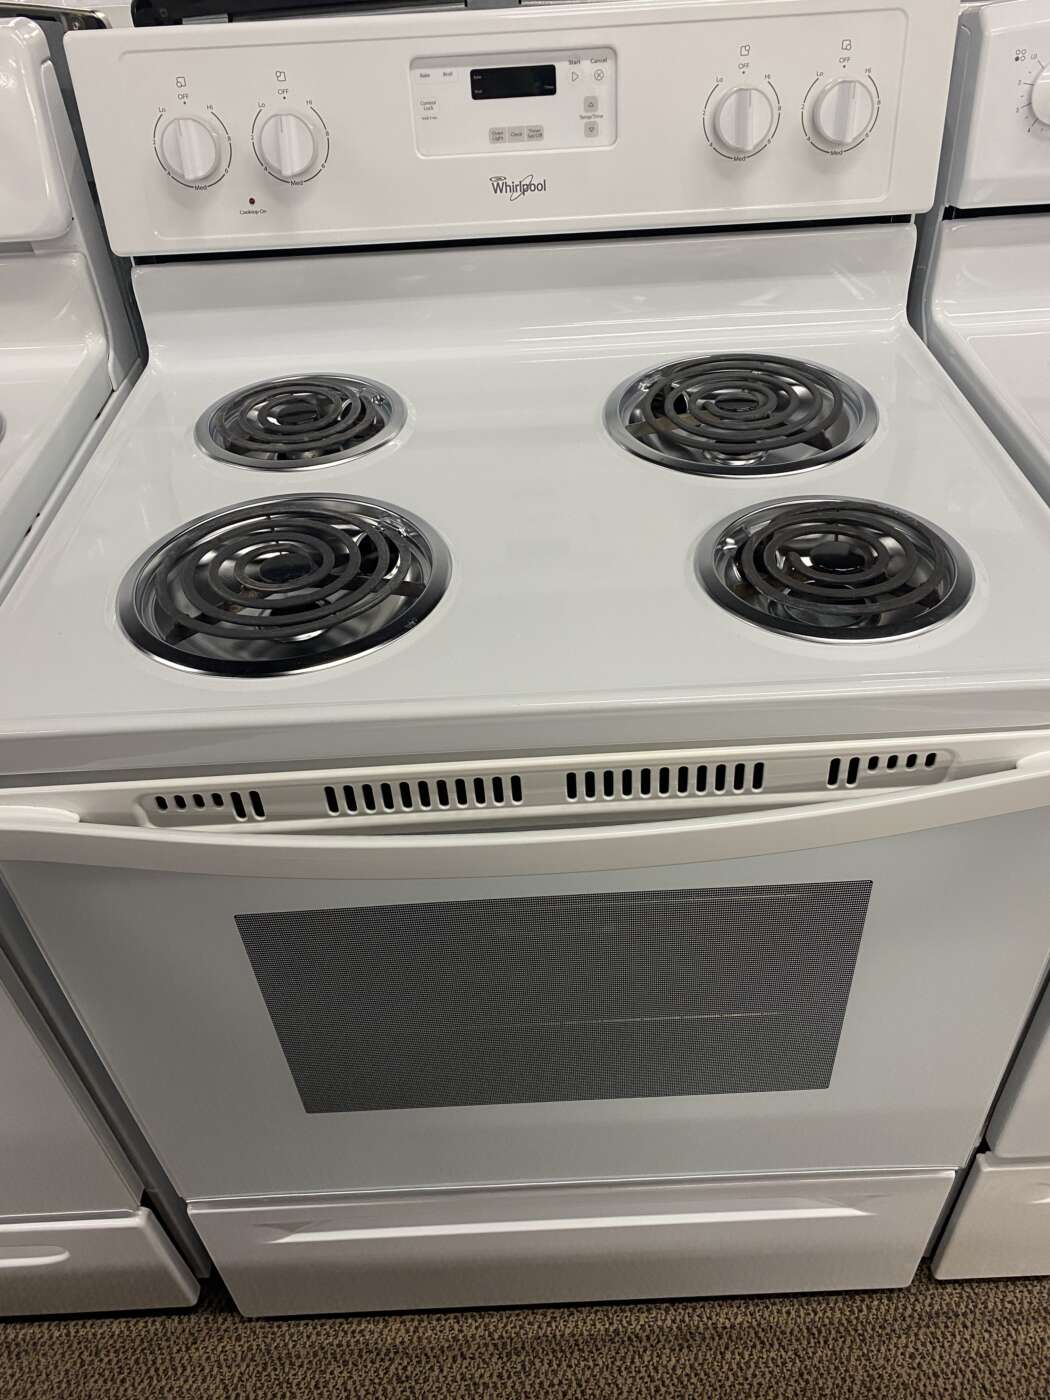 Reconditioned WHIRLPOOL 4.8 Cu. Ft. Electric Range (No Self-Clean)